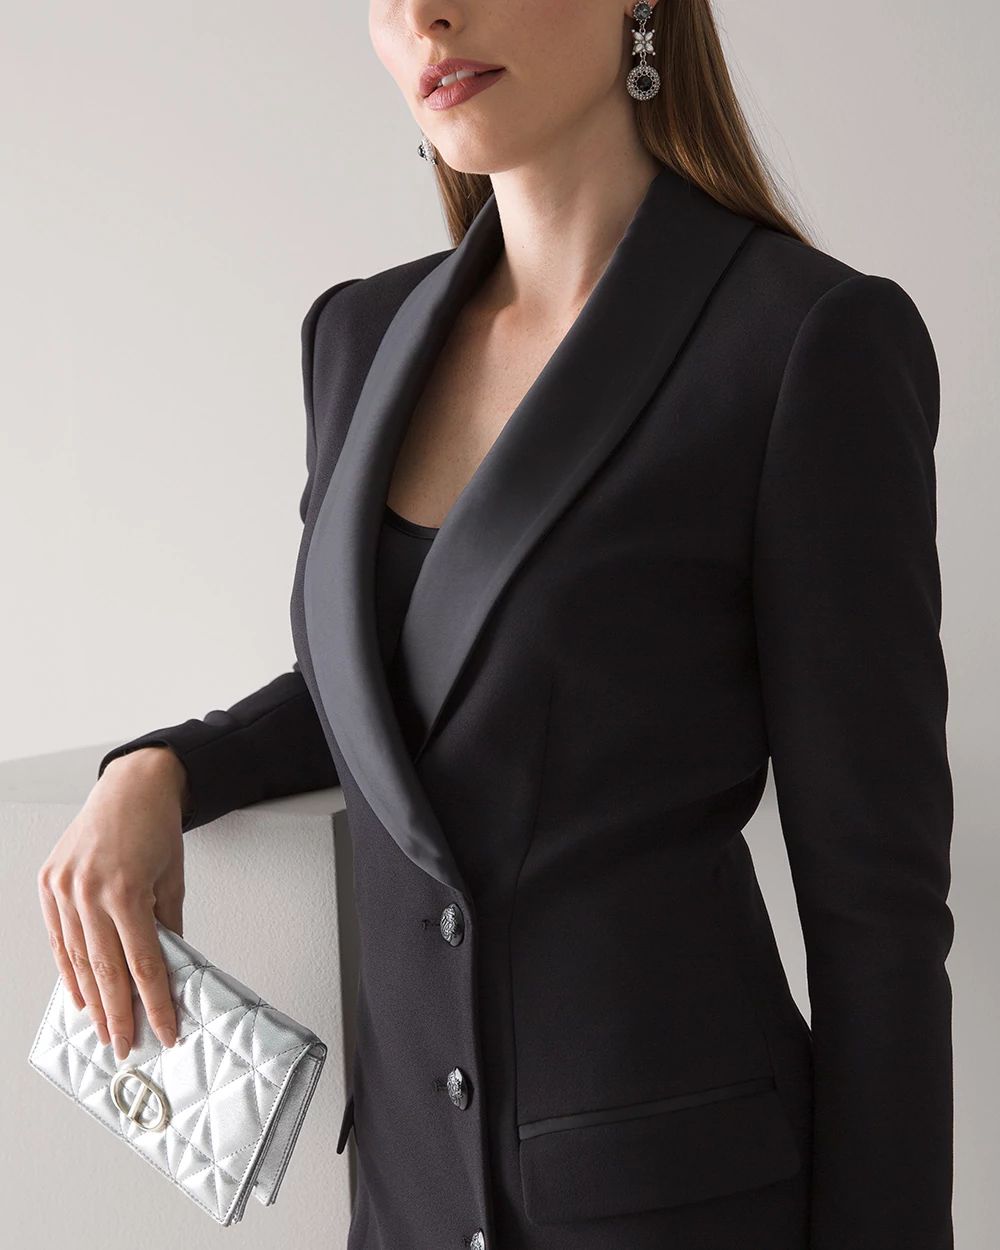 Long-Sleeve Blazer Dress click to view larger image.